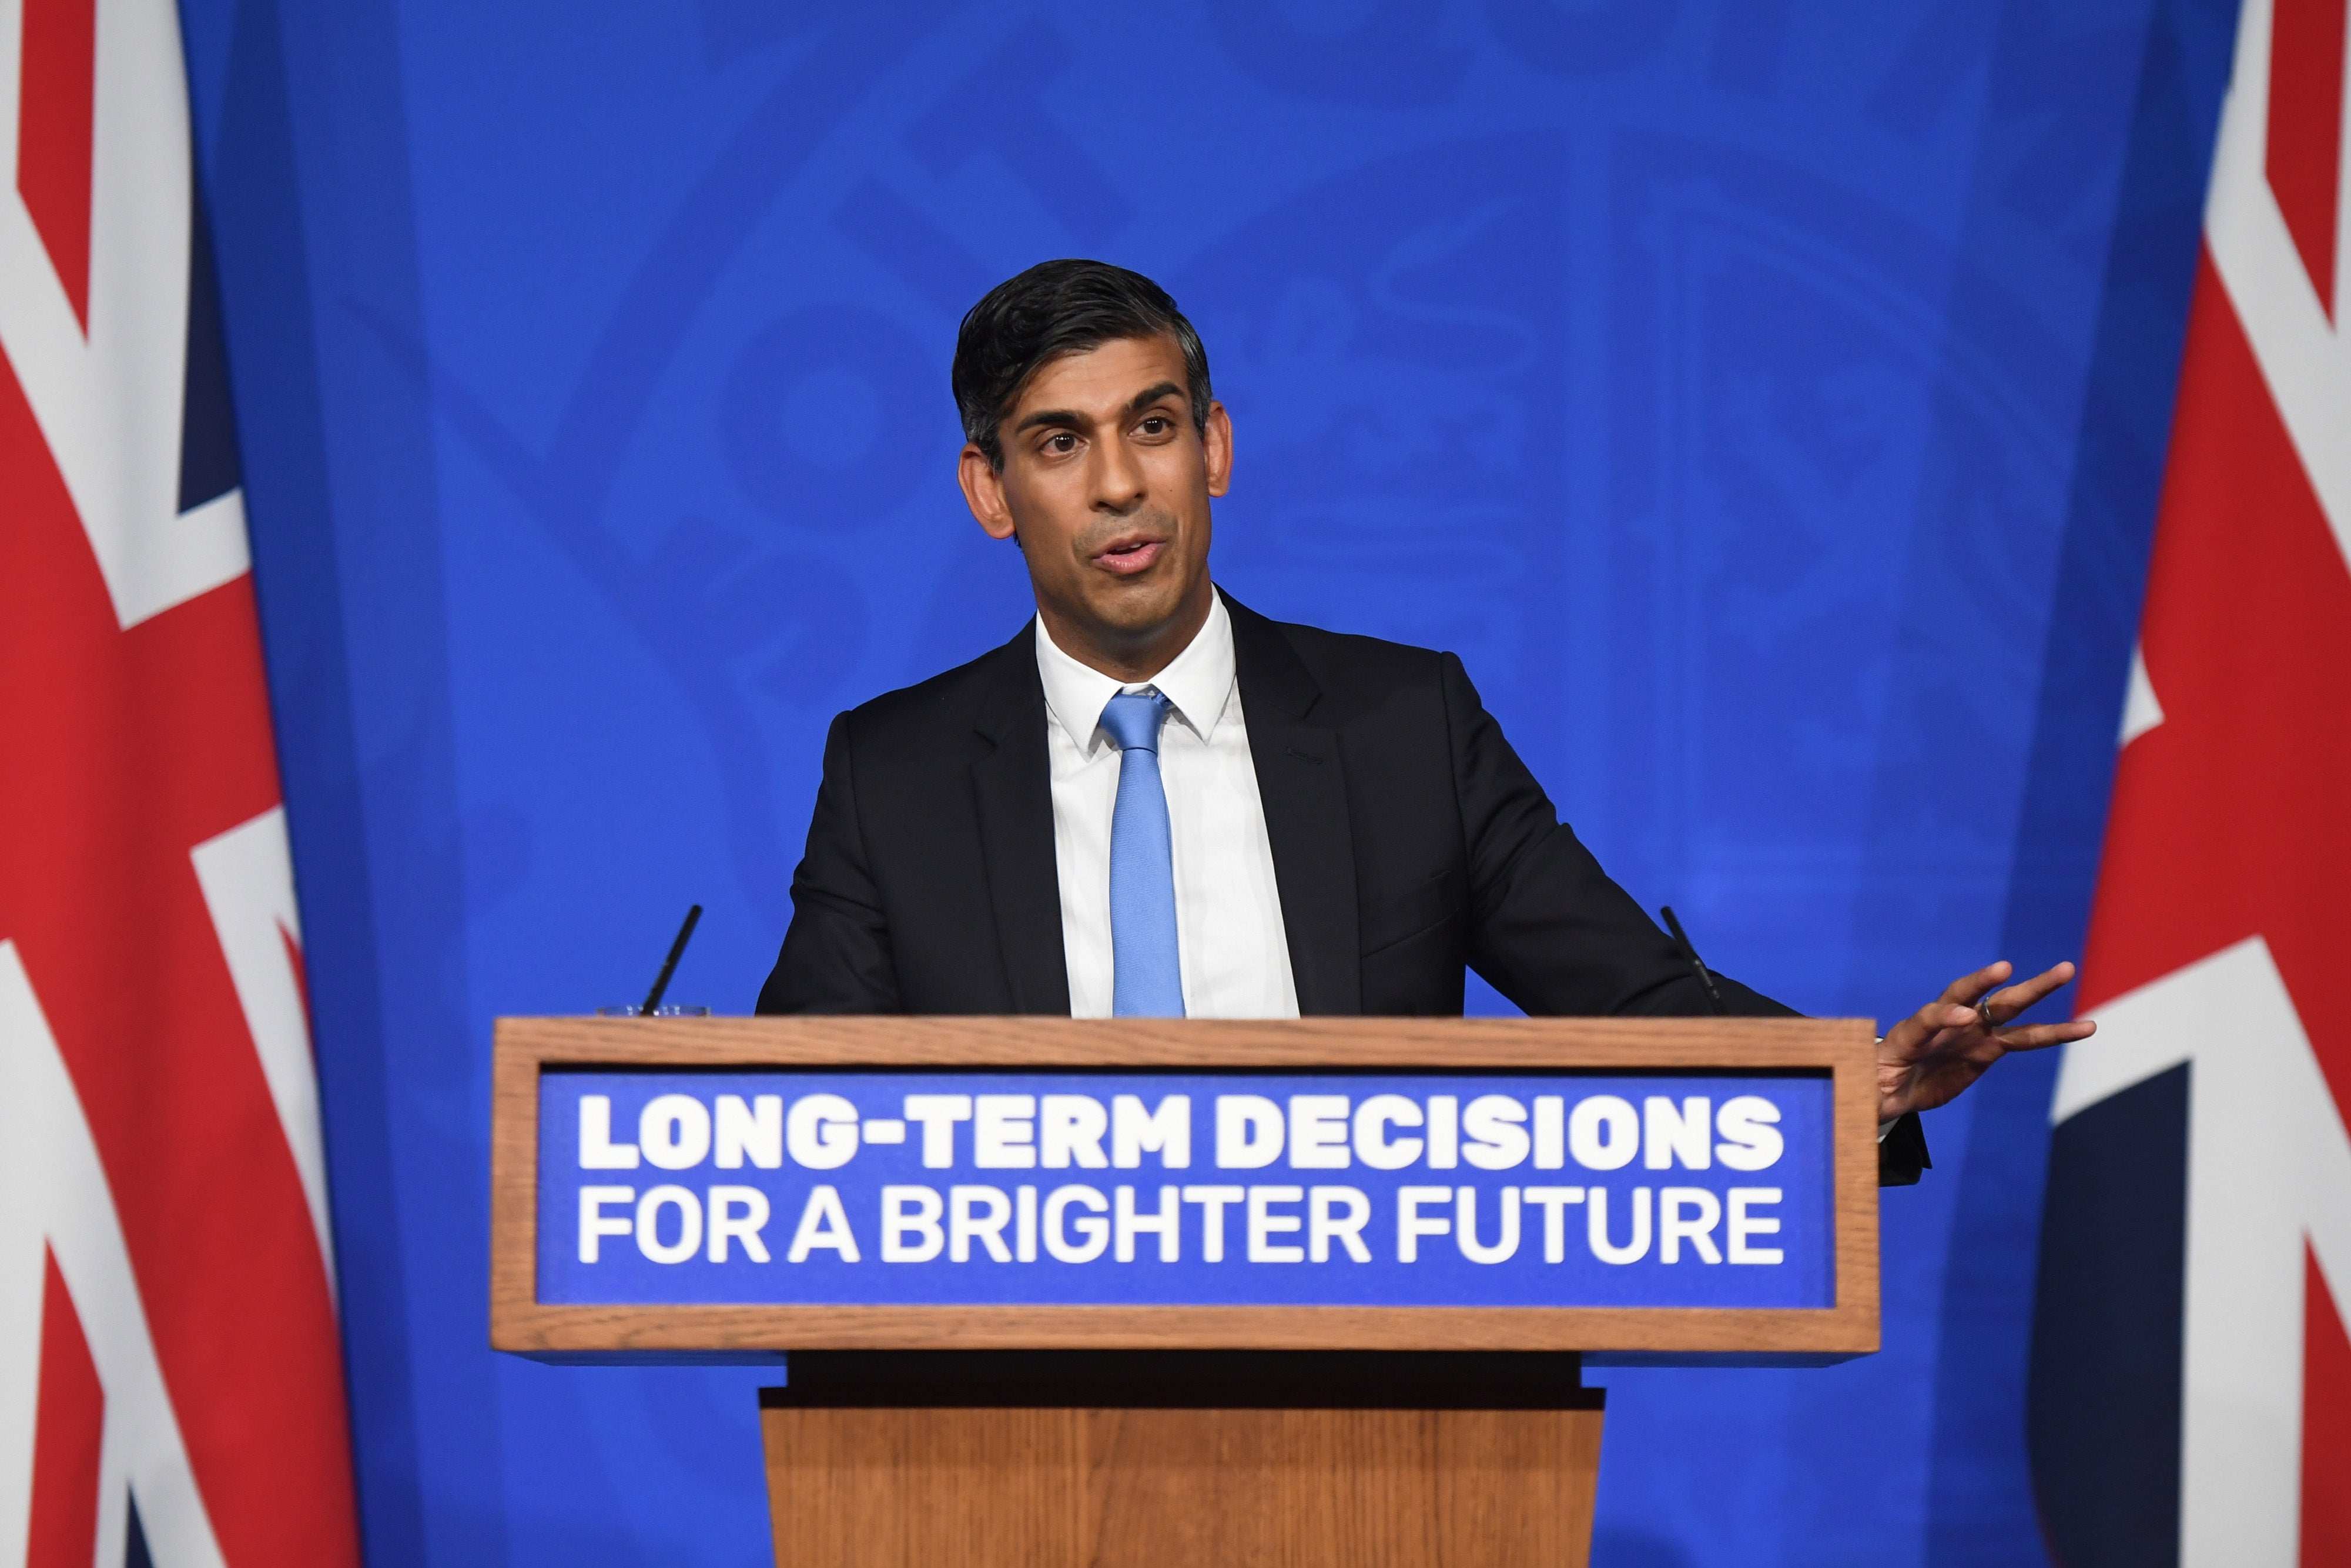 Rishi Sunak skipped a climate summit to give a domestic speech watering down decarbonisation pledges